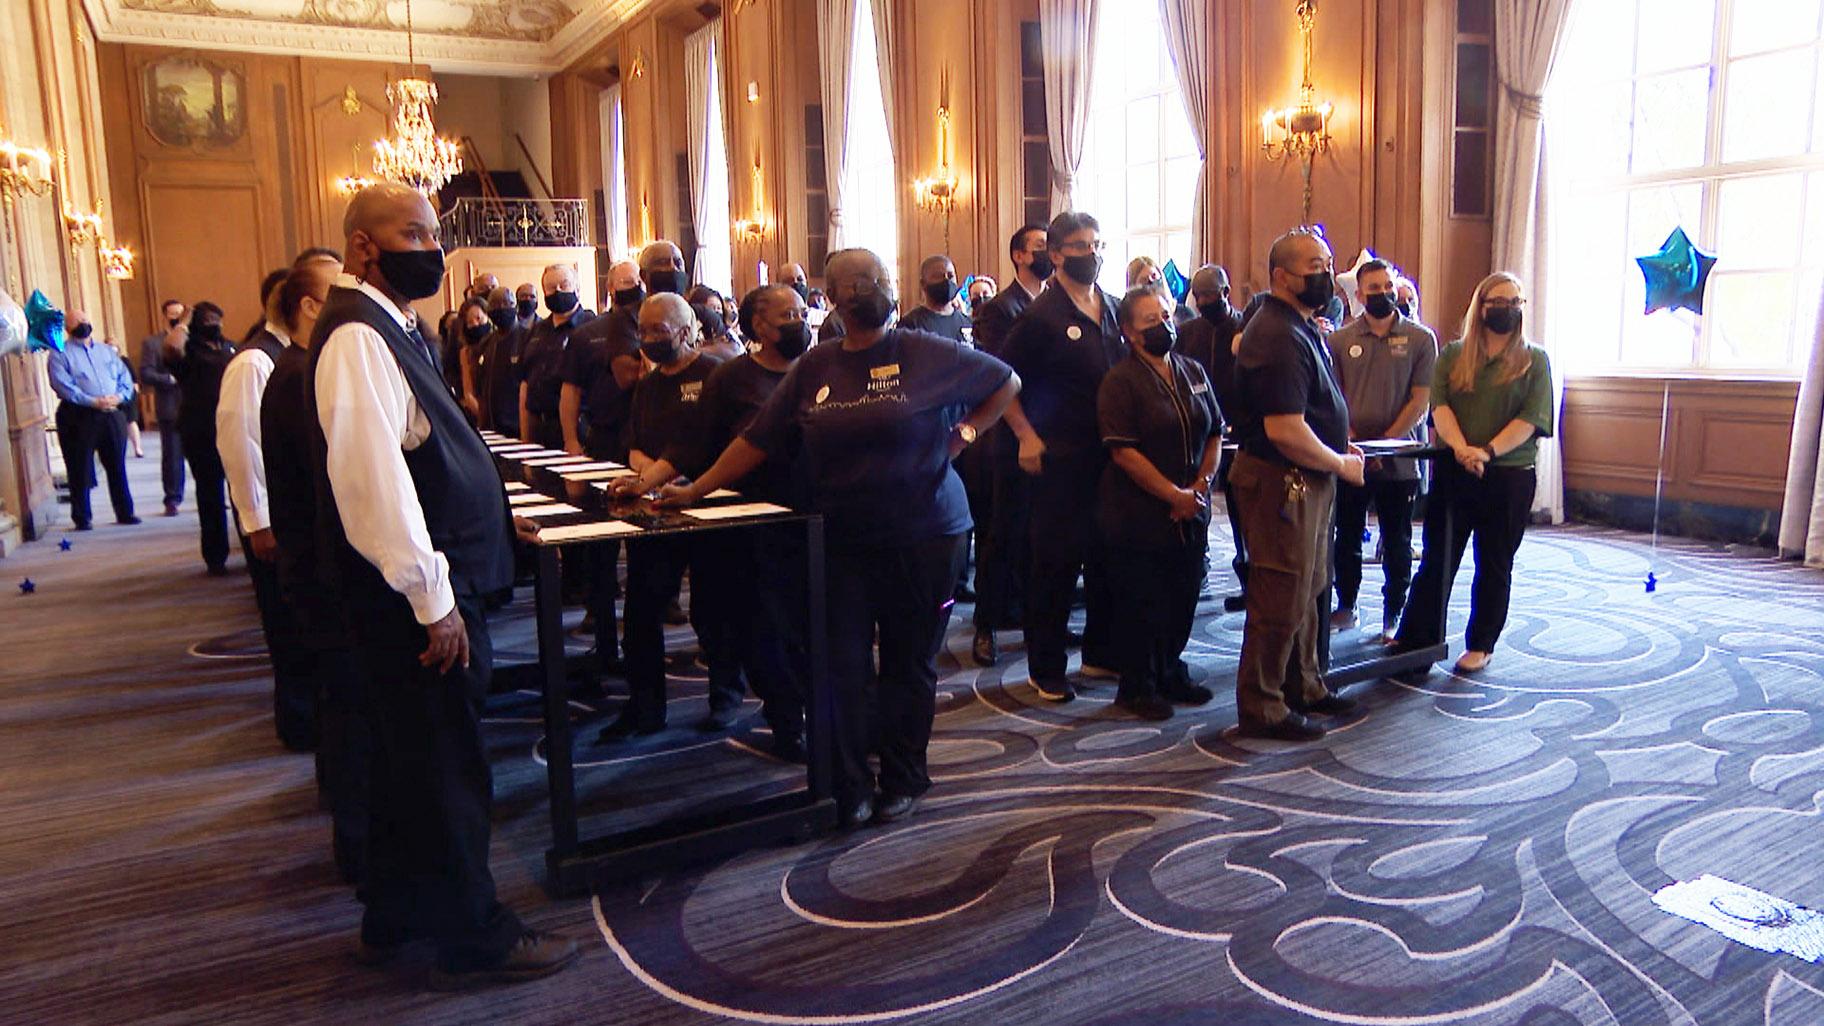 Nearly 200 previously furloughed staff members returned to the Chicago Hilton and Towers on Thursday, June 10, 2021, to prepare for the state’s full reopening Friday. (WTTW News)